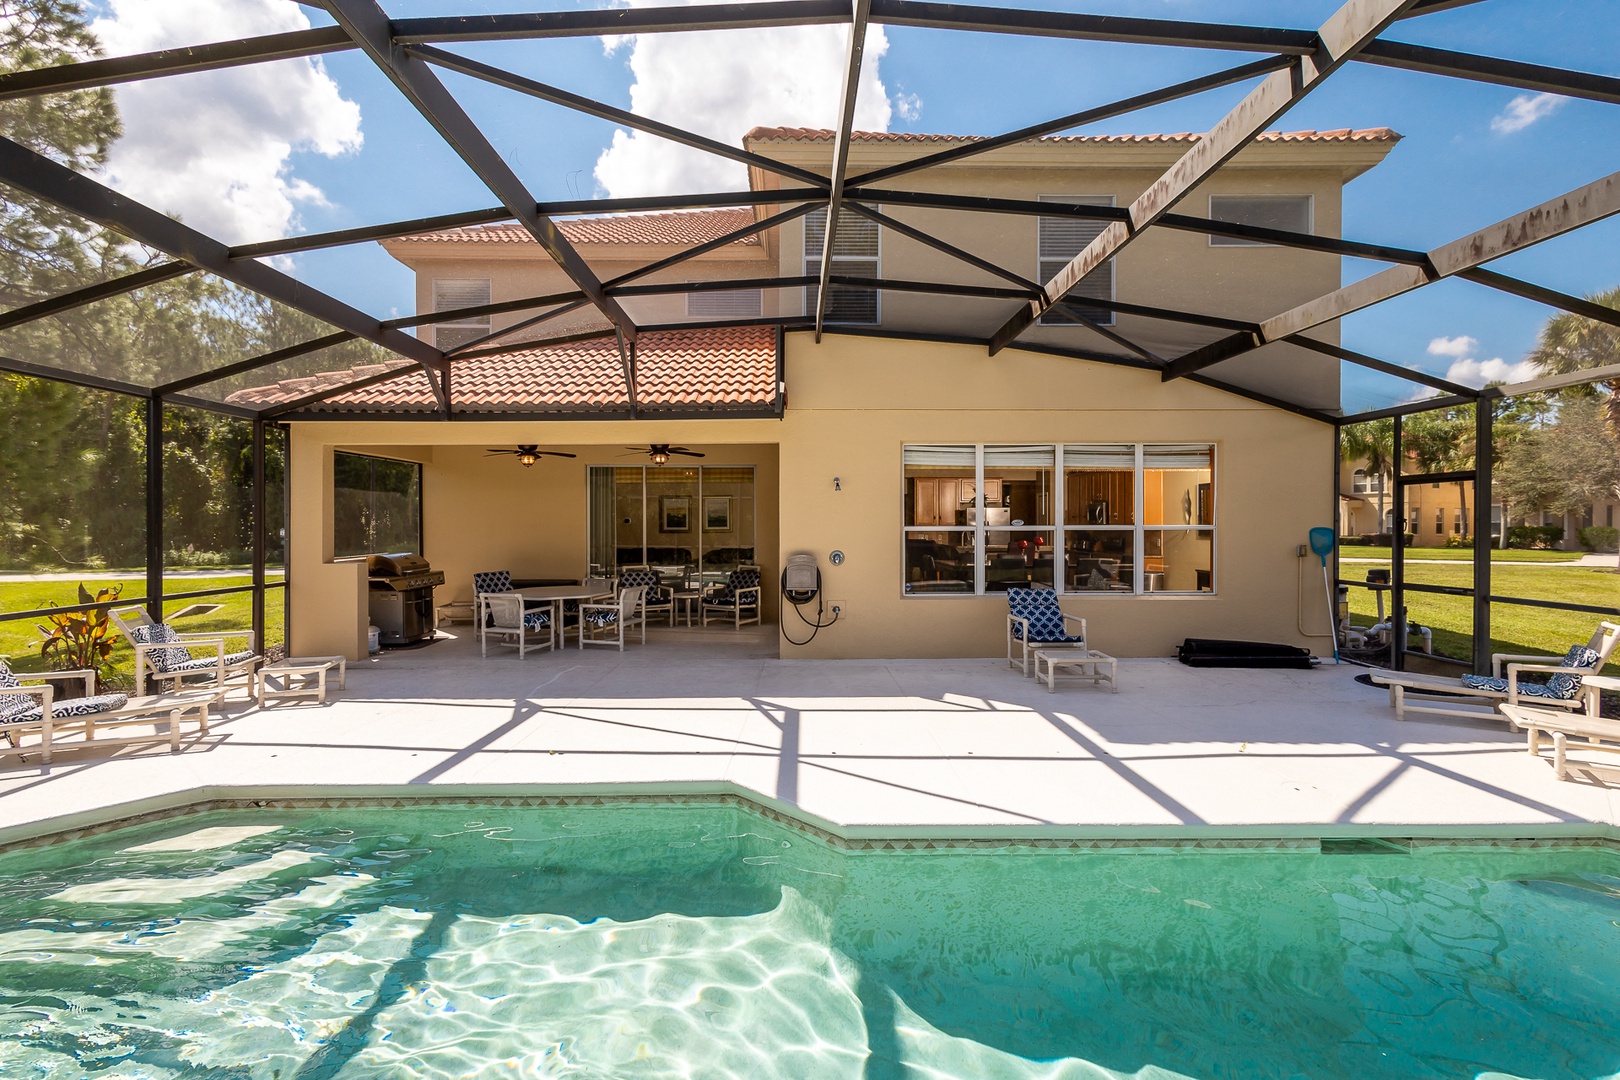 Lounge under the lanai or make a splash in your very own private pool!